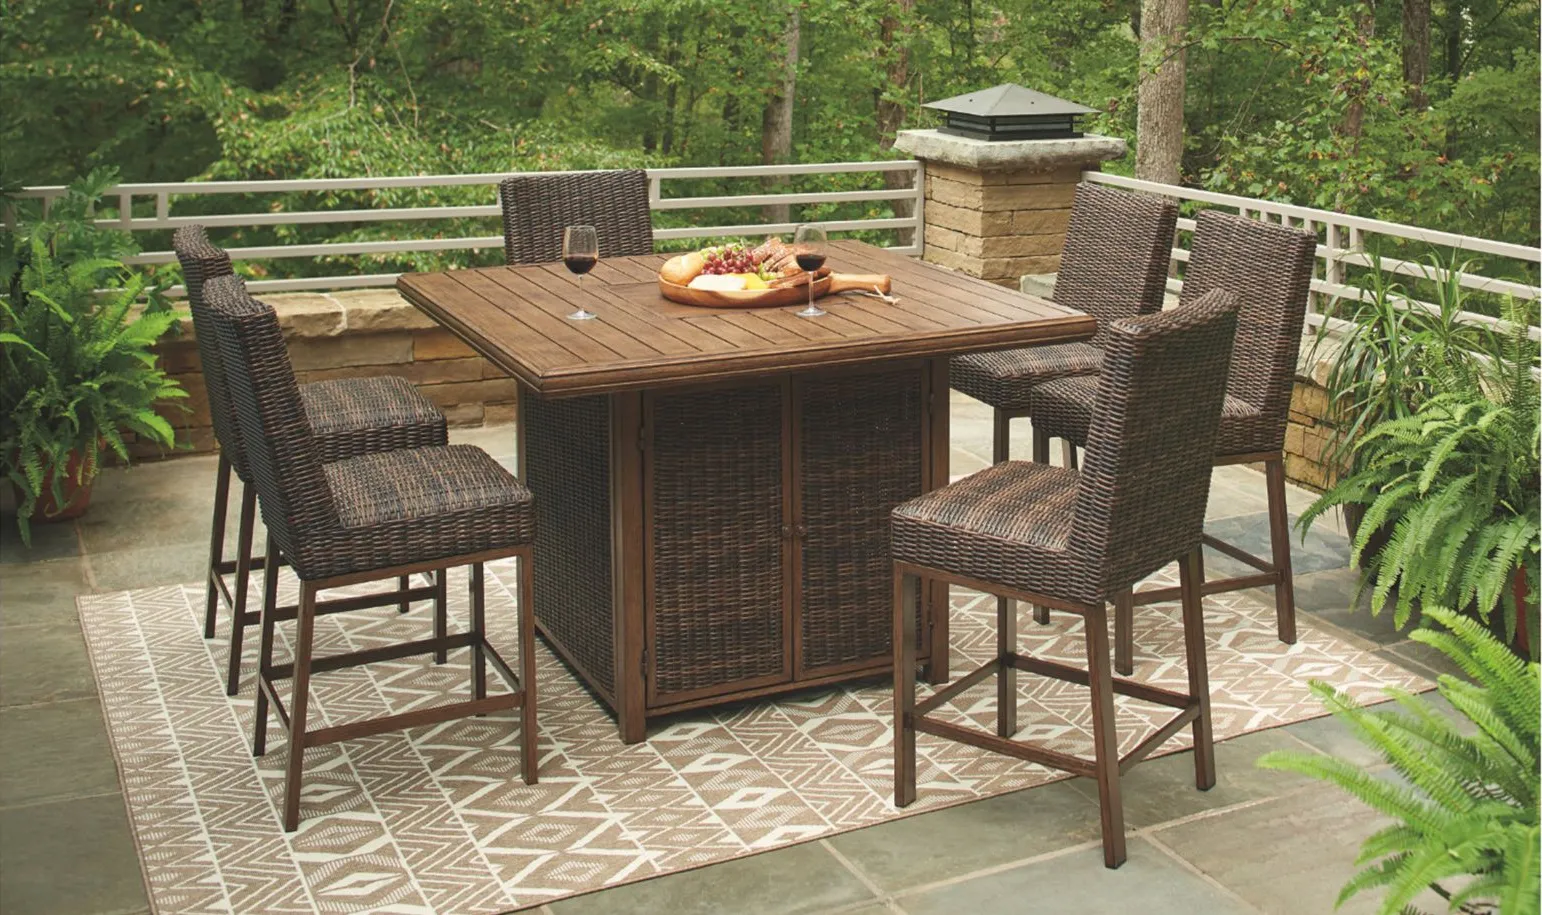 Paradise Trail 7- pc. Outdoor Fire Pit Set in Medium Brown by Ashley Furniture